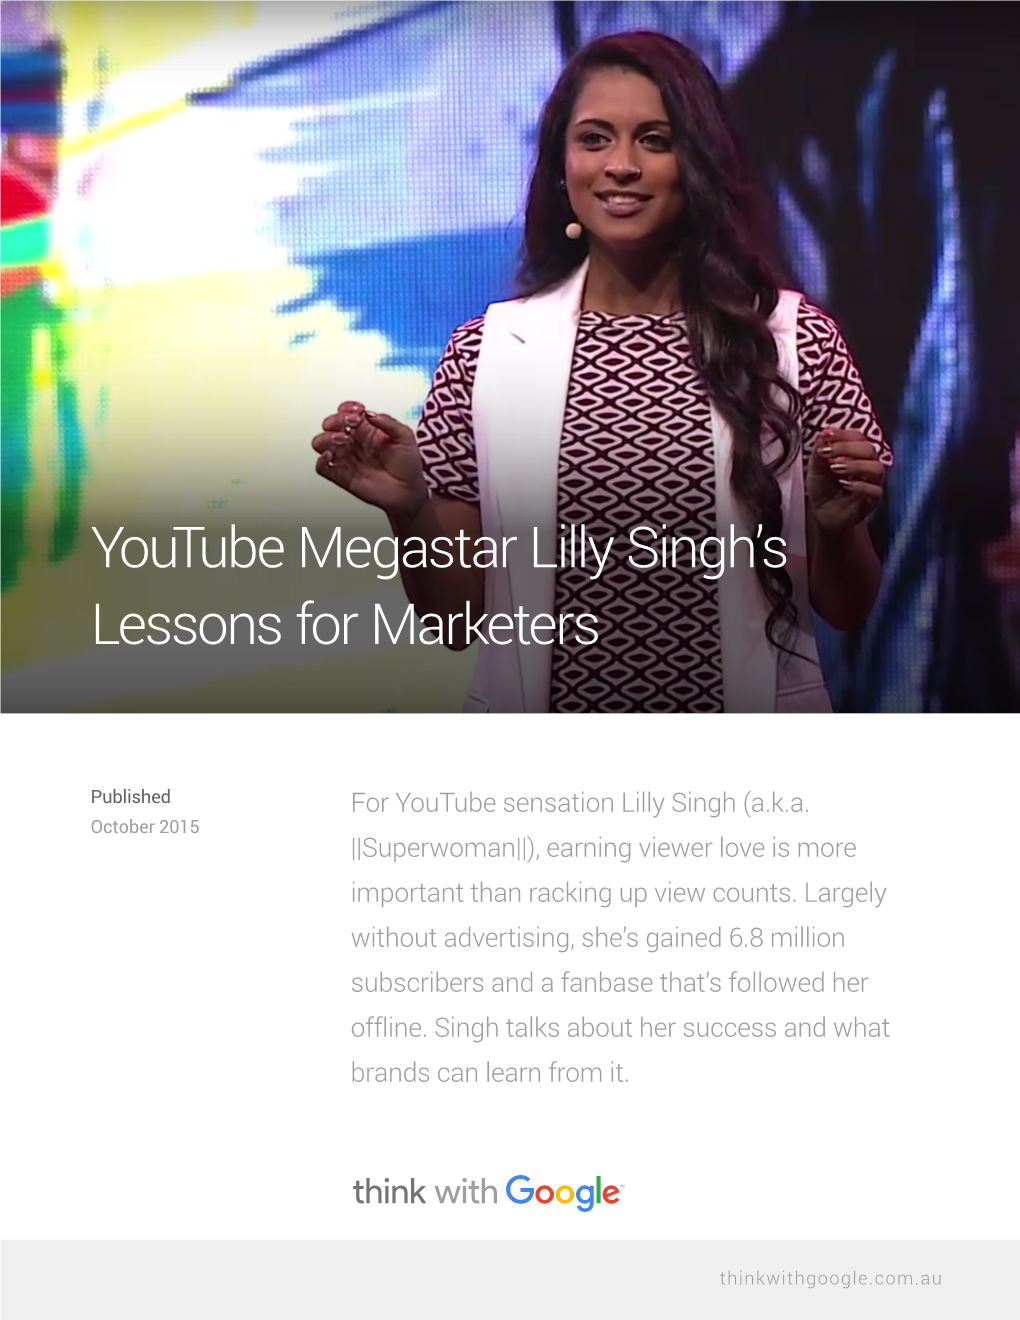 Youtube Megastar Lilly Singh's Lessons for Marketers